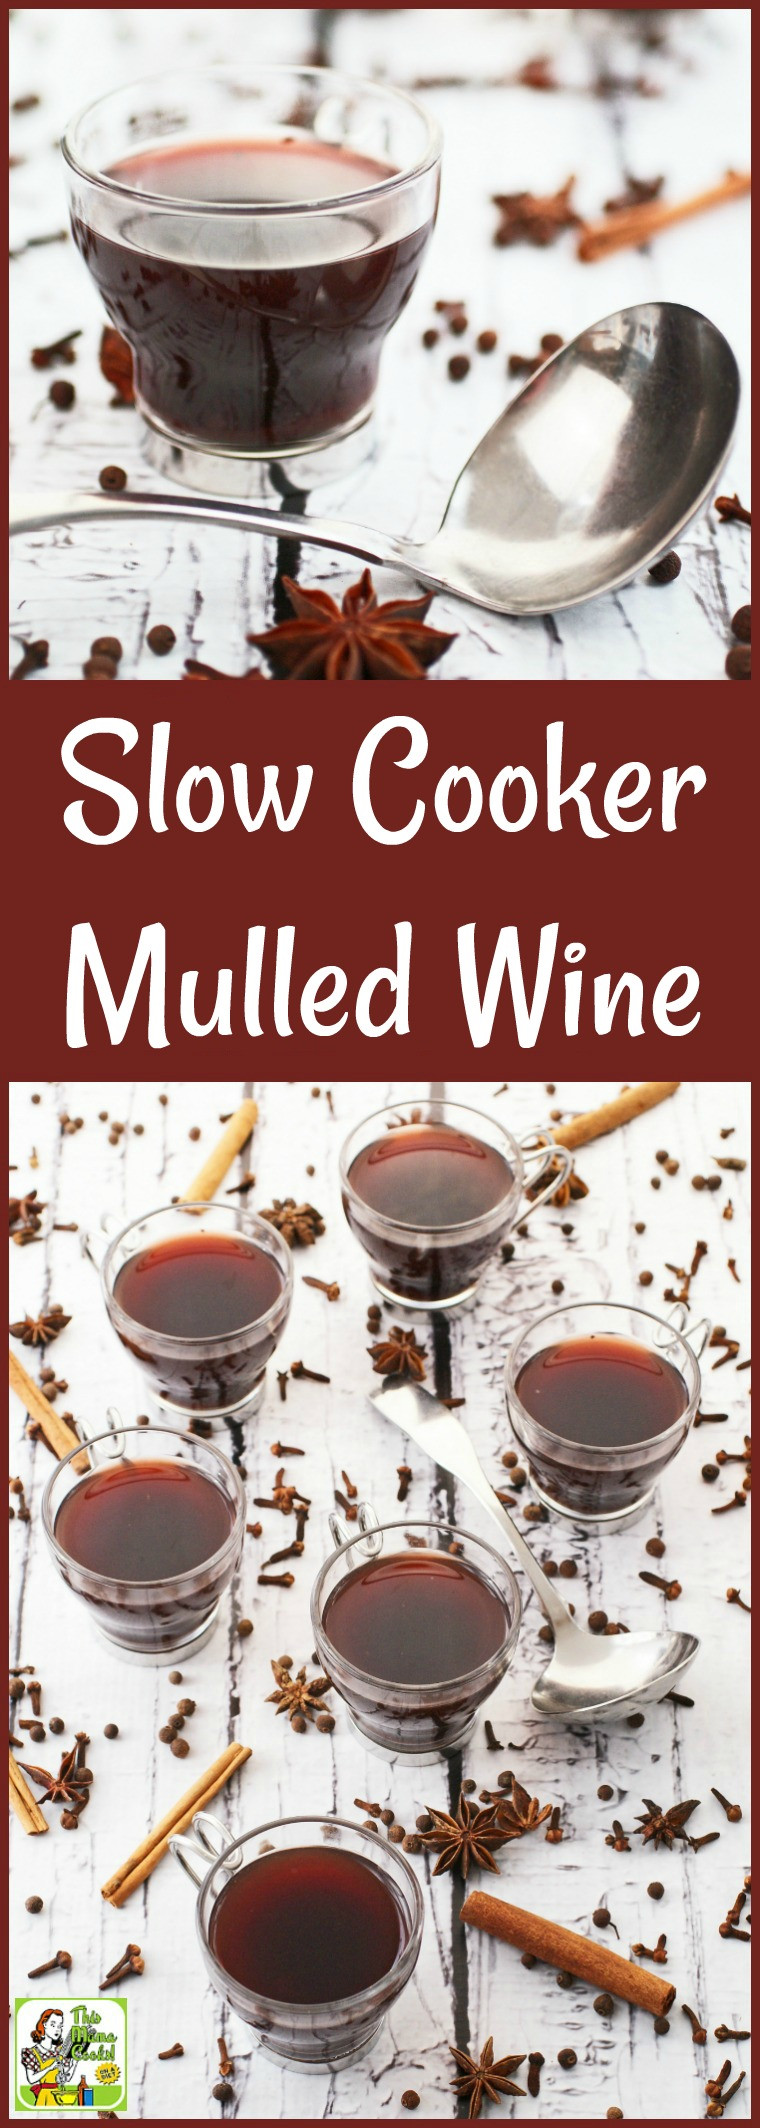 Mulled Wine Recipe Slow Cooker
 Slow Cooker Mulled Wine